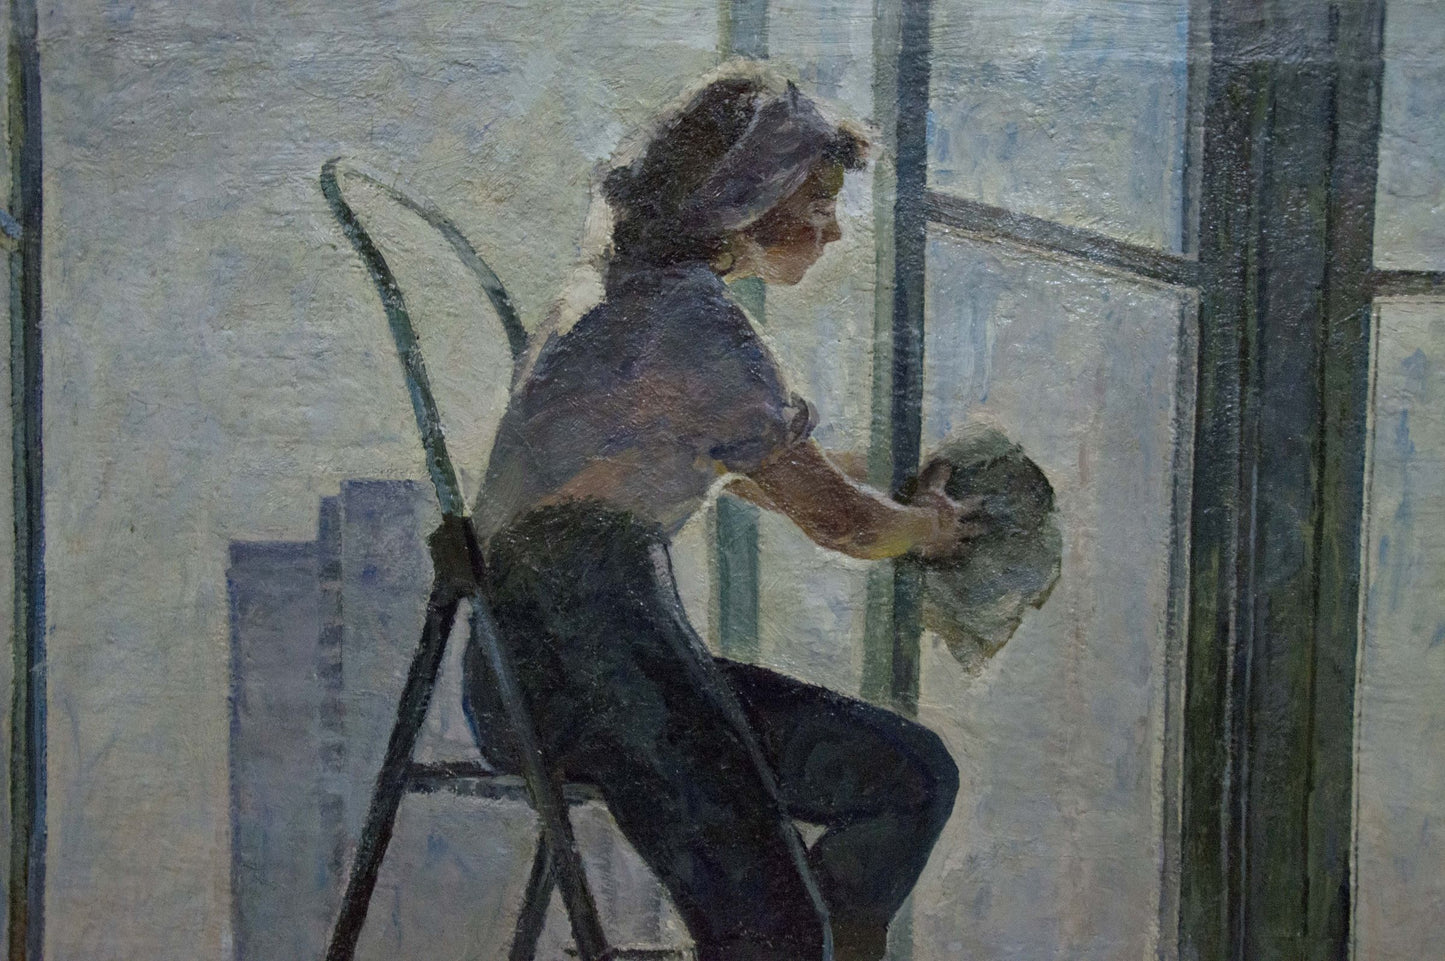 Oil painting Girl washes a window